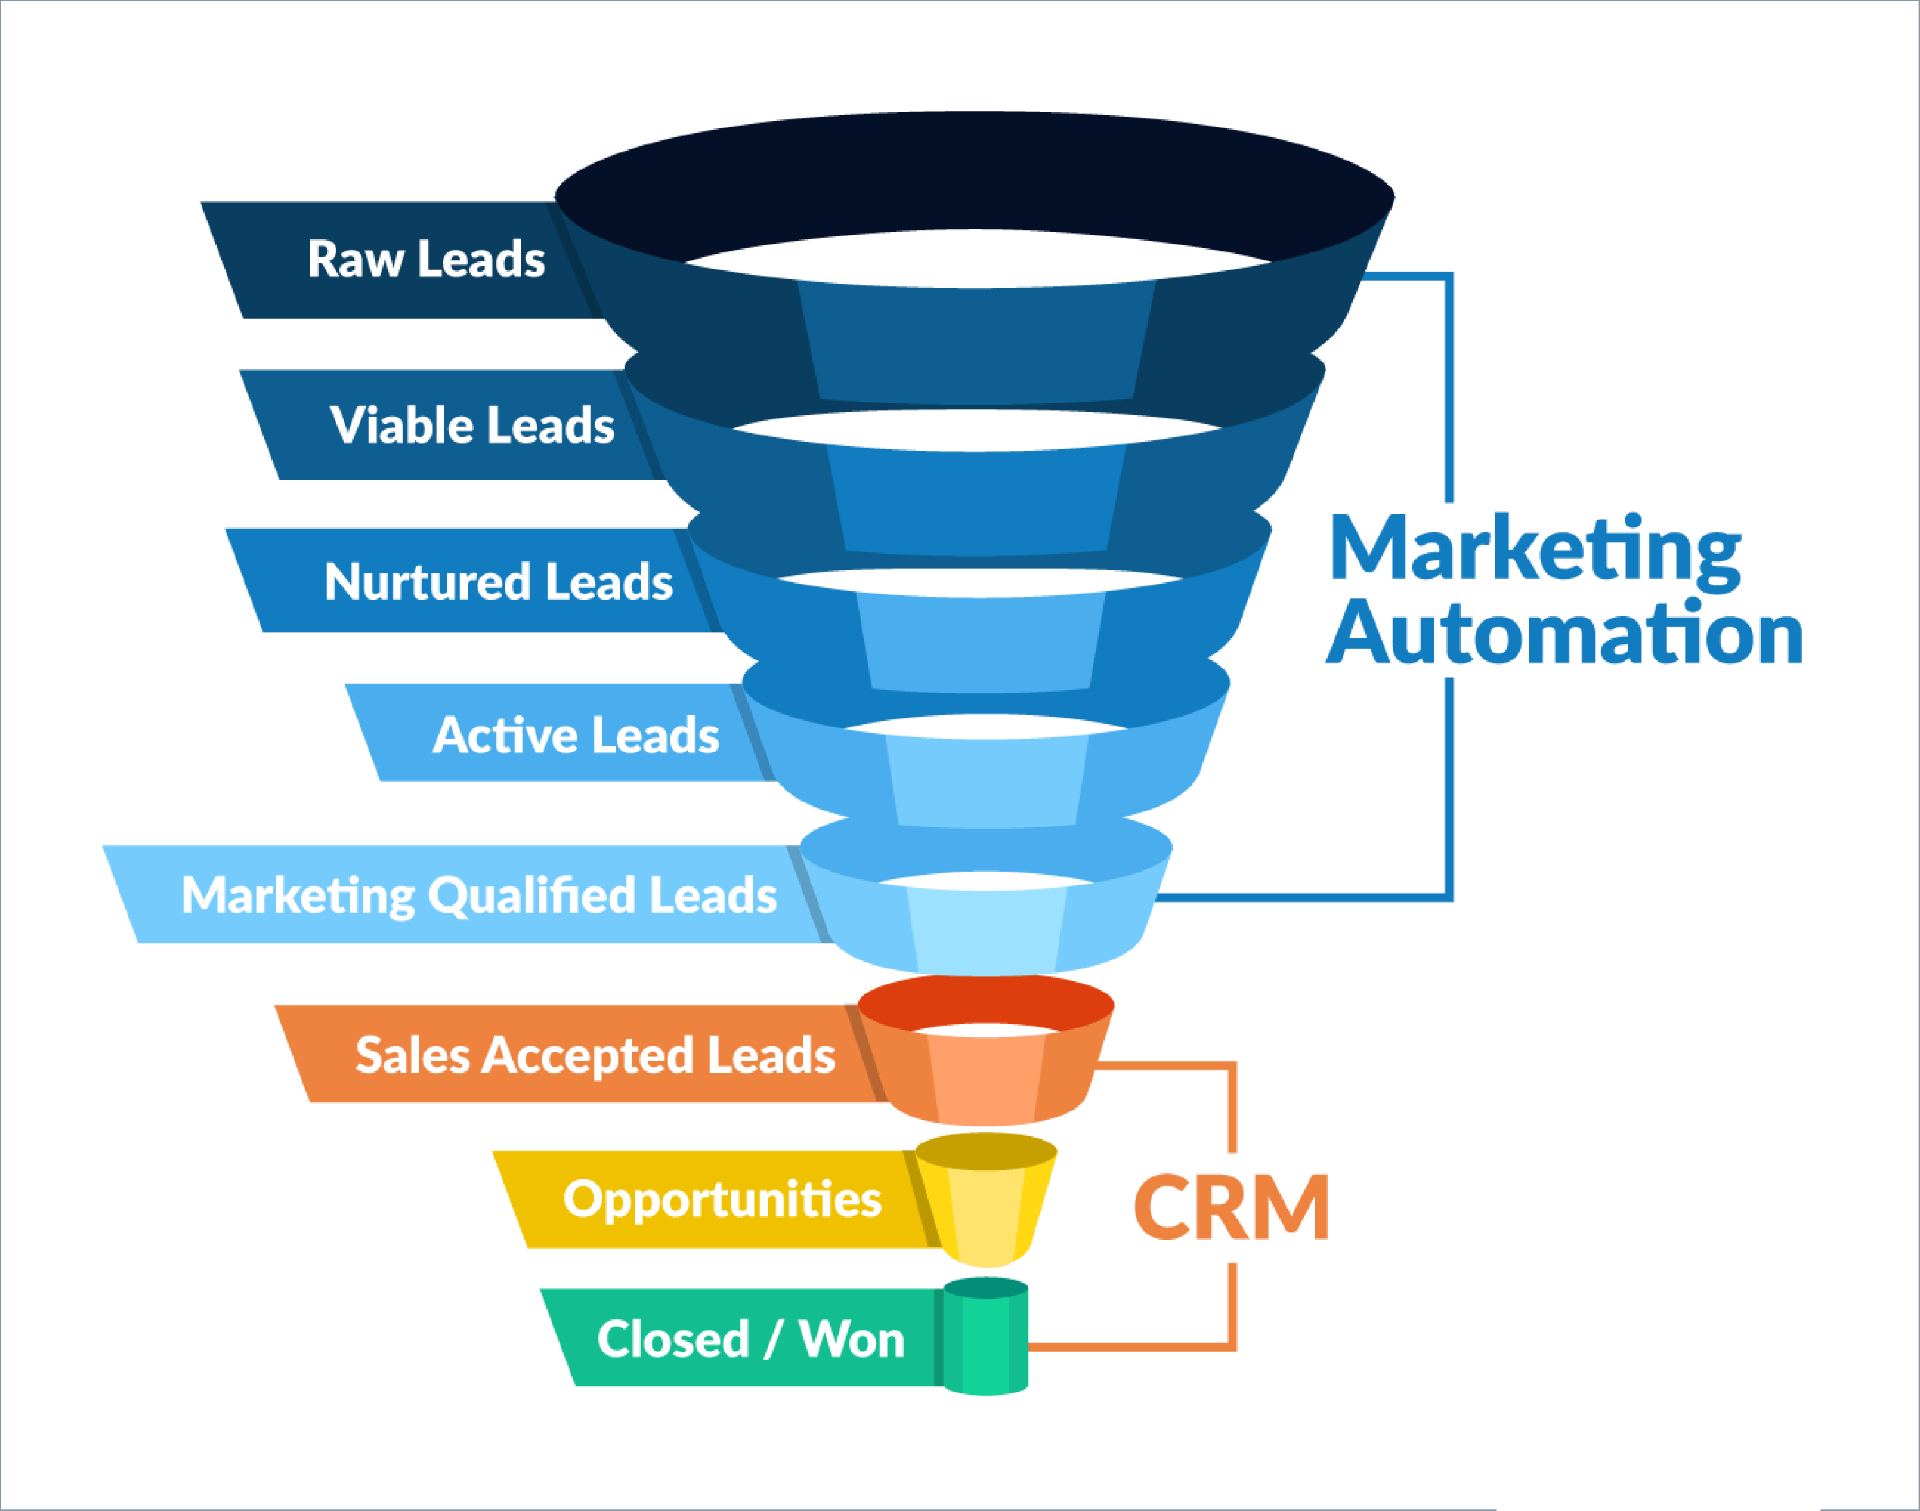 This image shows the marketing funnel for SaaS sales